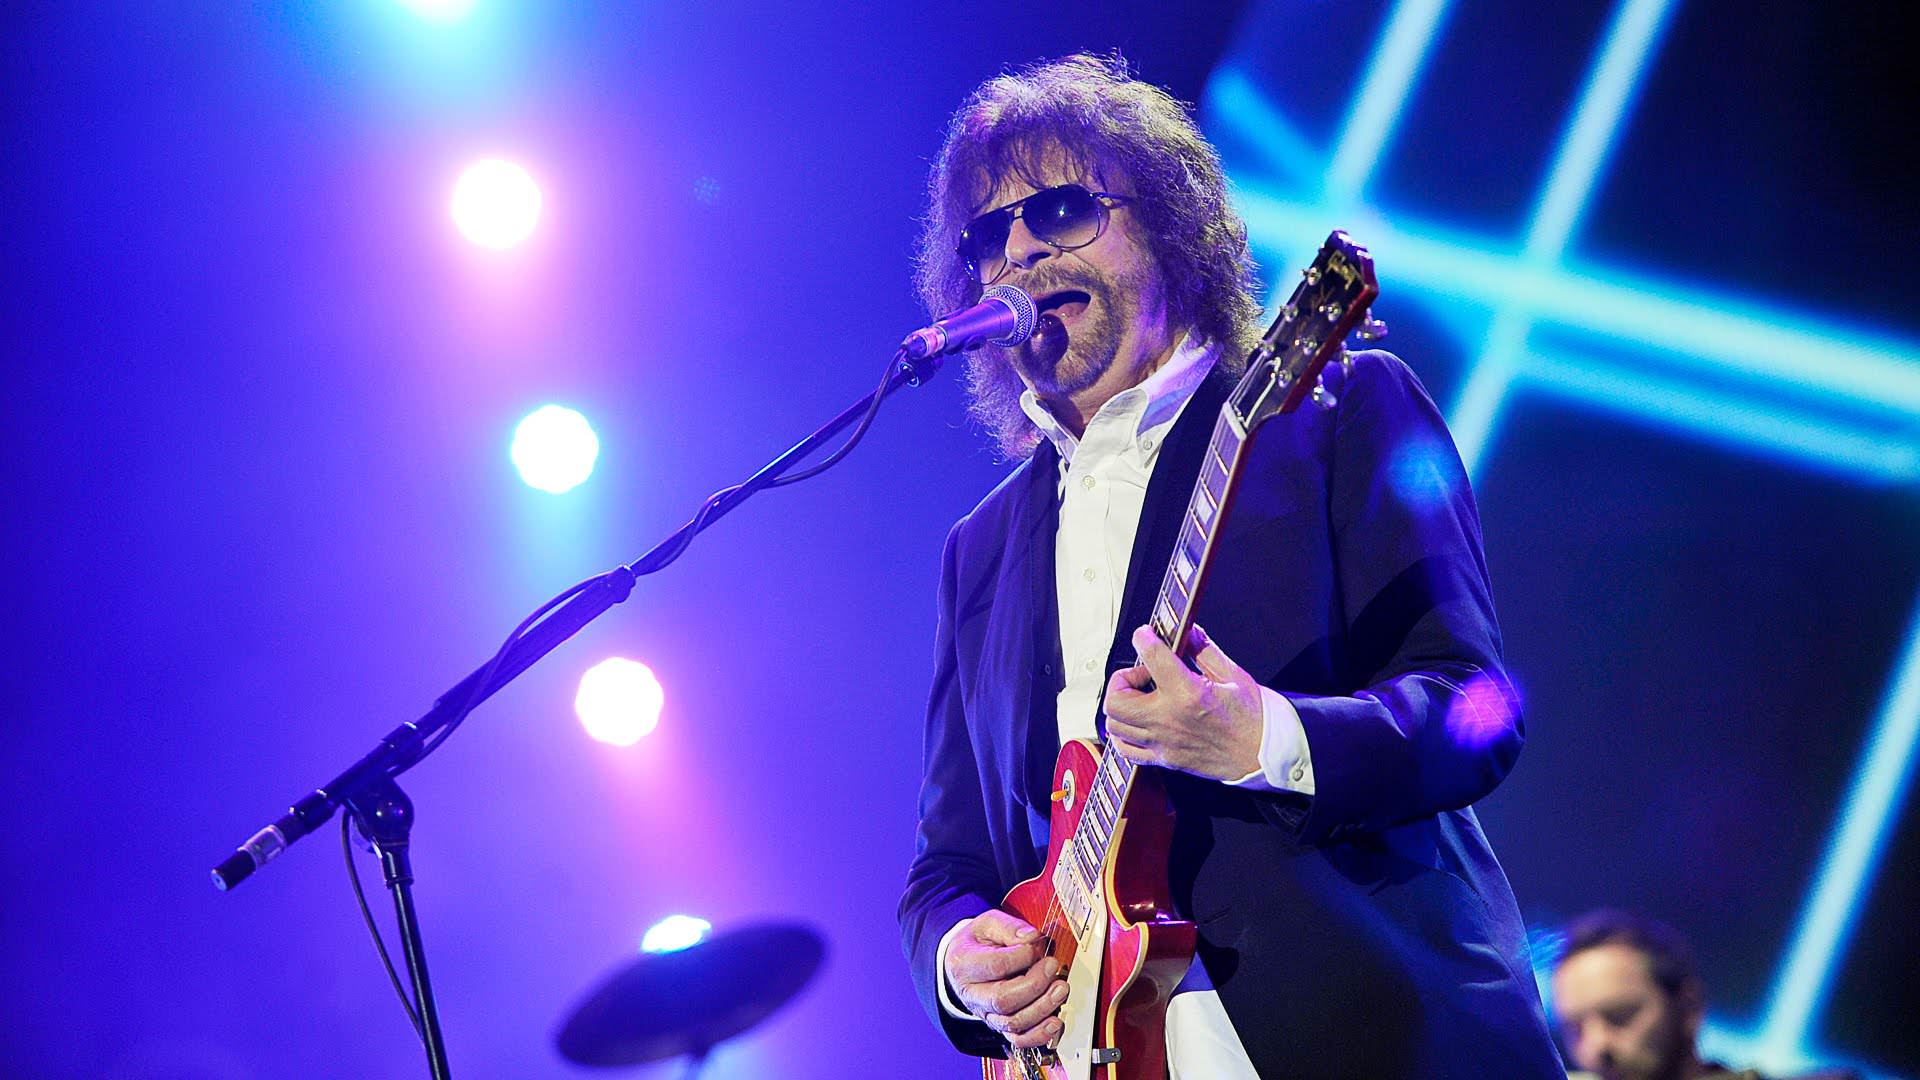 BREAKING NEWS: Jeff Lynne's ELO Announces First U.S. Tour in Years